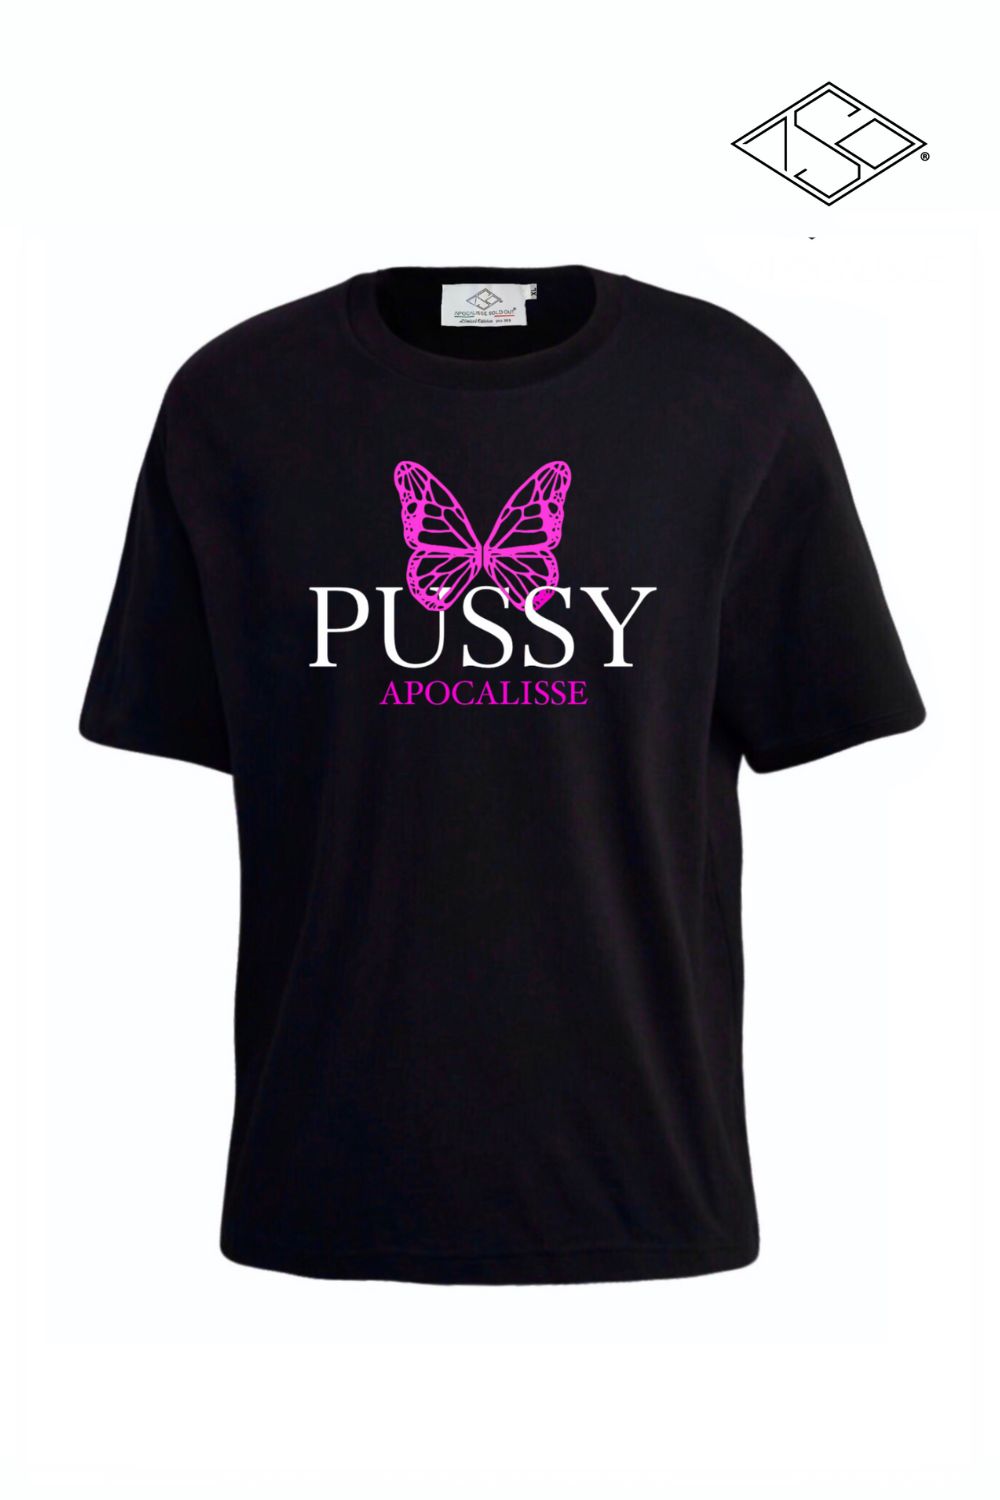 tshirt Apocalisse pu**y butterfly by ApocalisseSoldOut® Fashion Brand